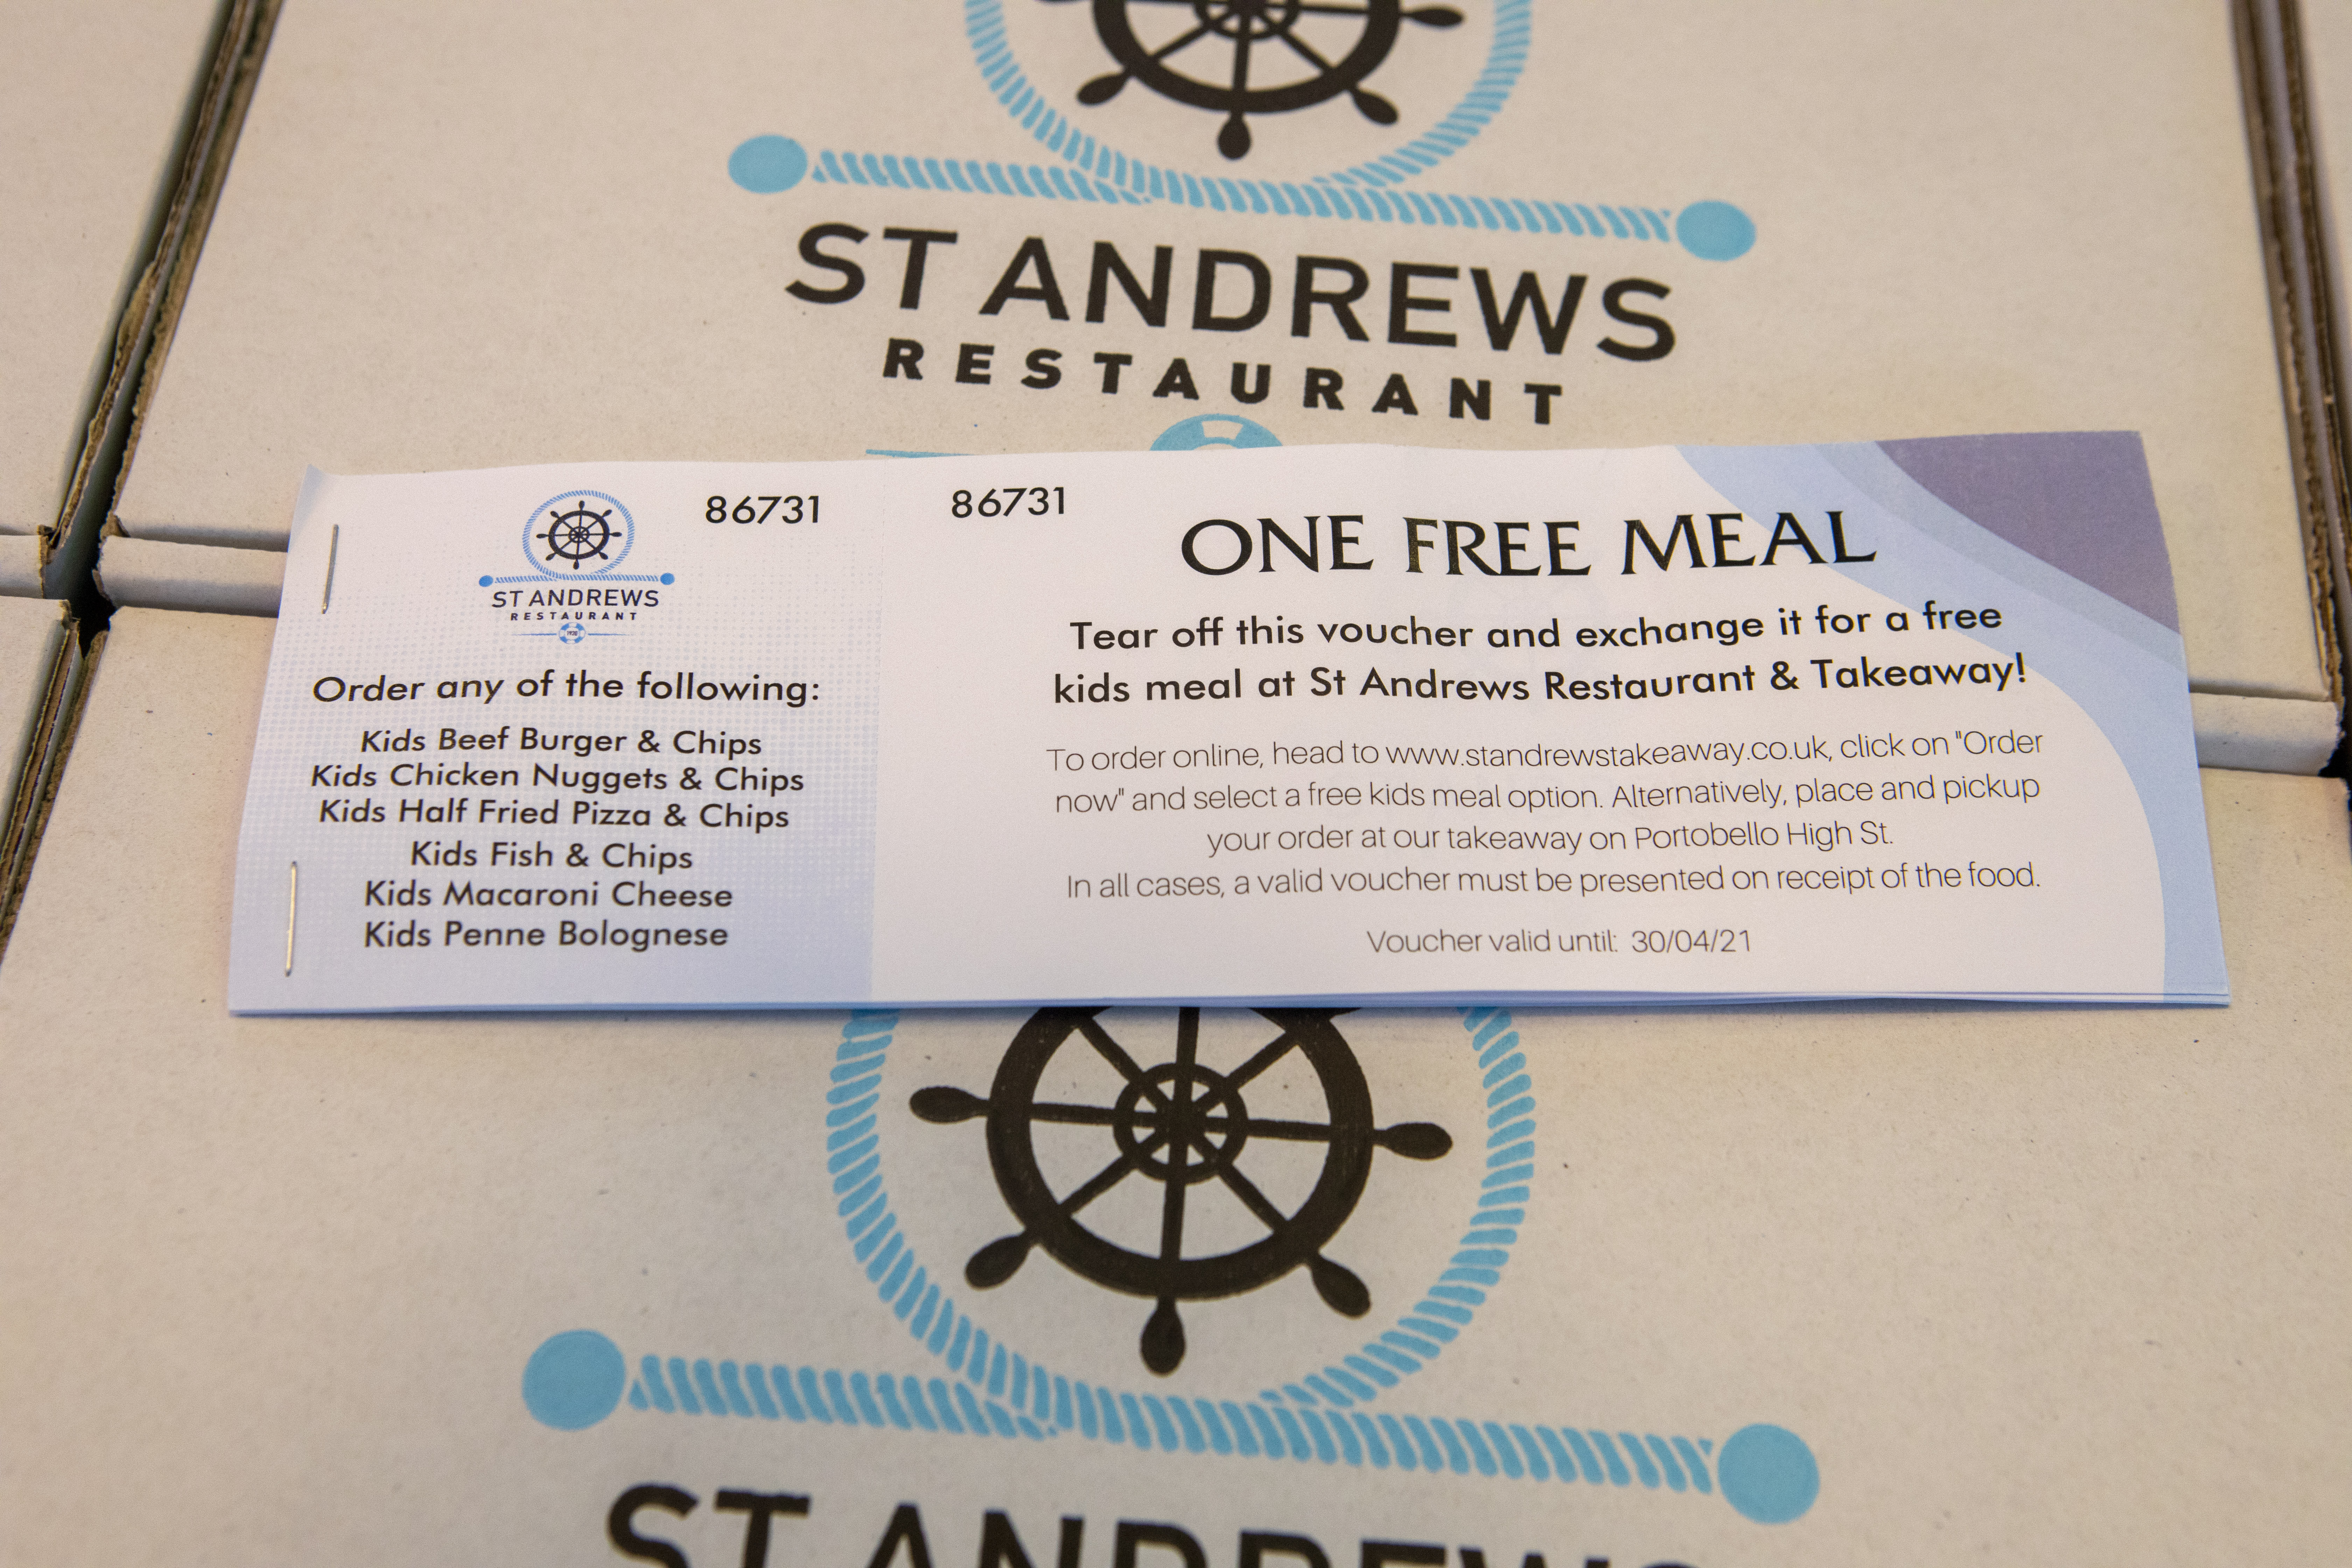 The vouchers allow children ten hot meals from the chippy.